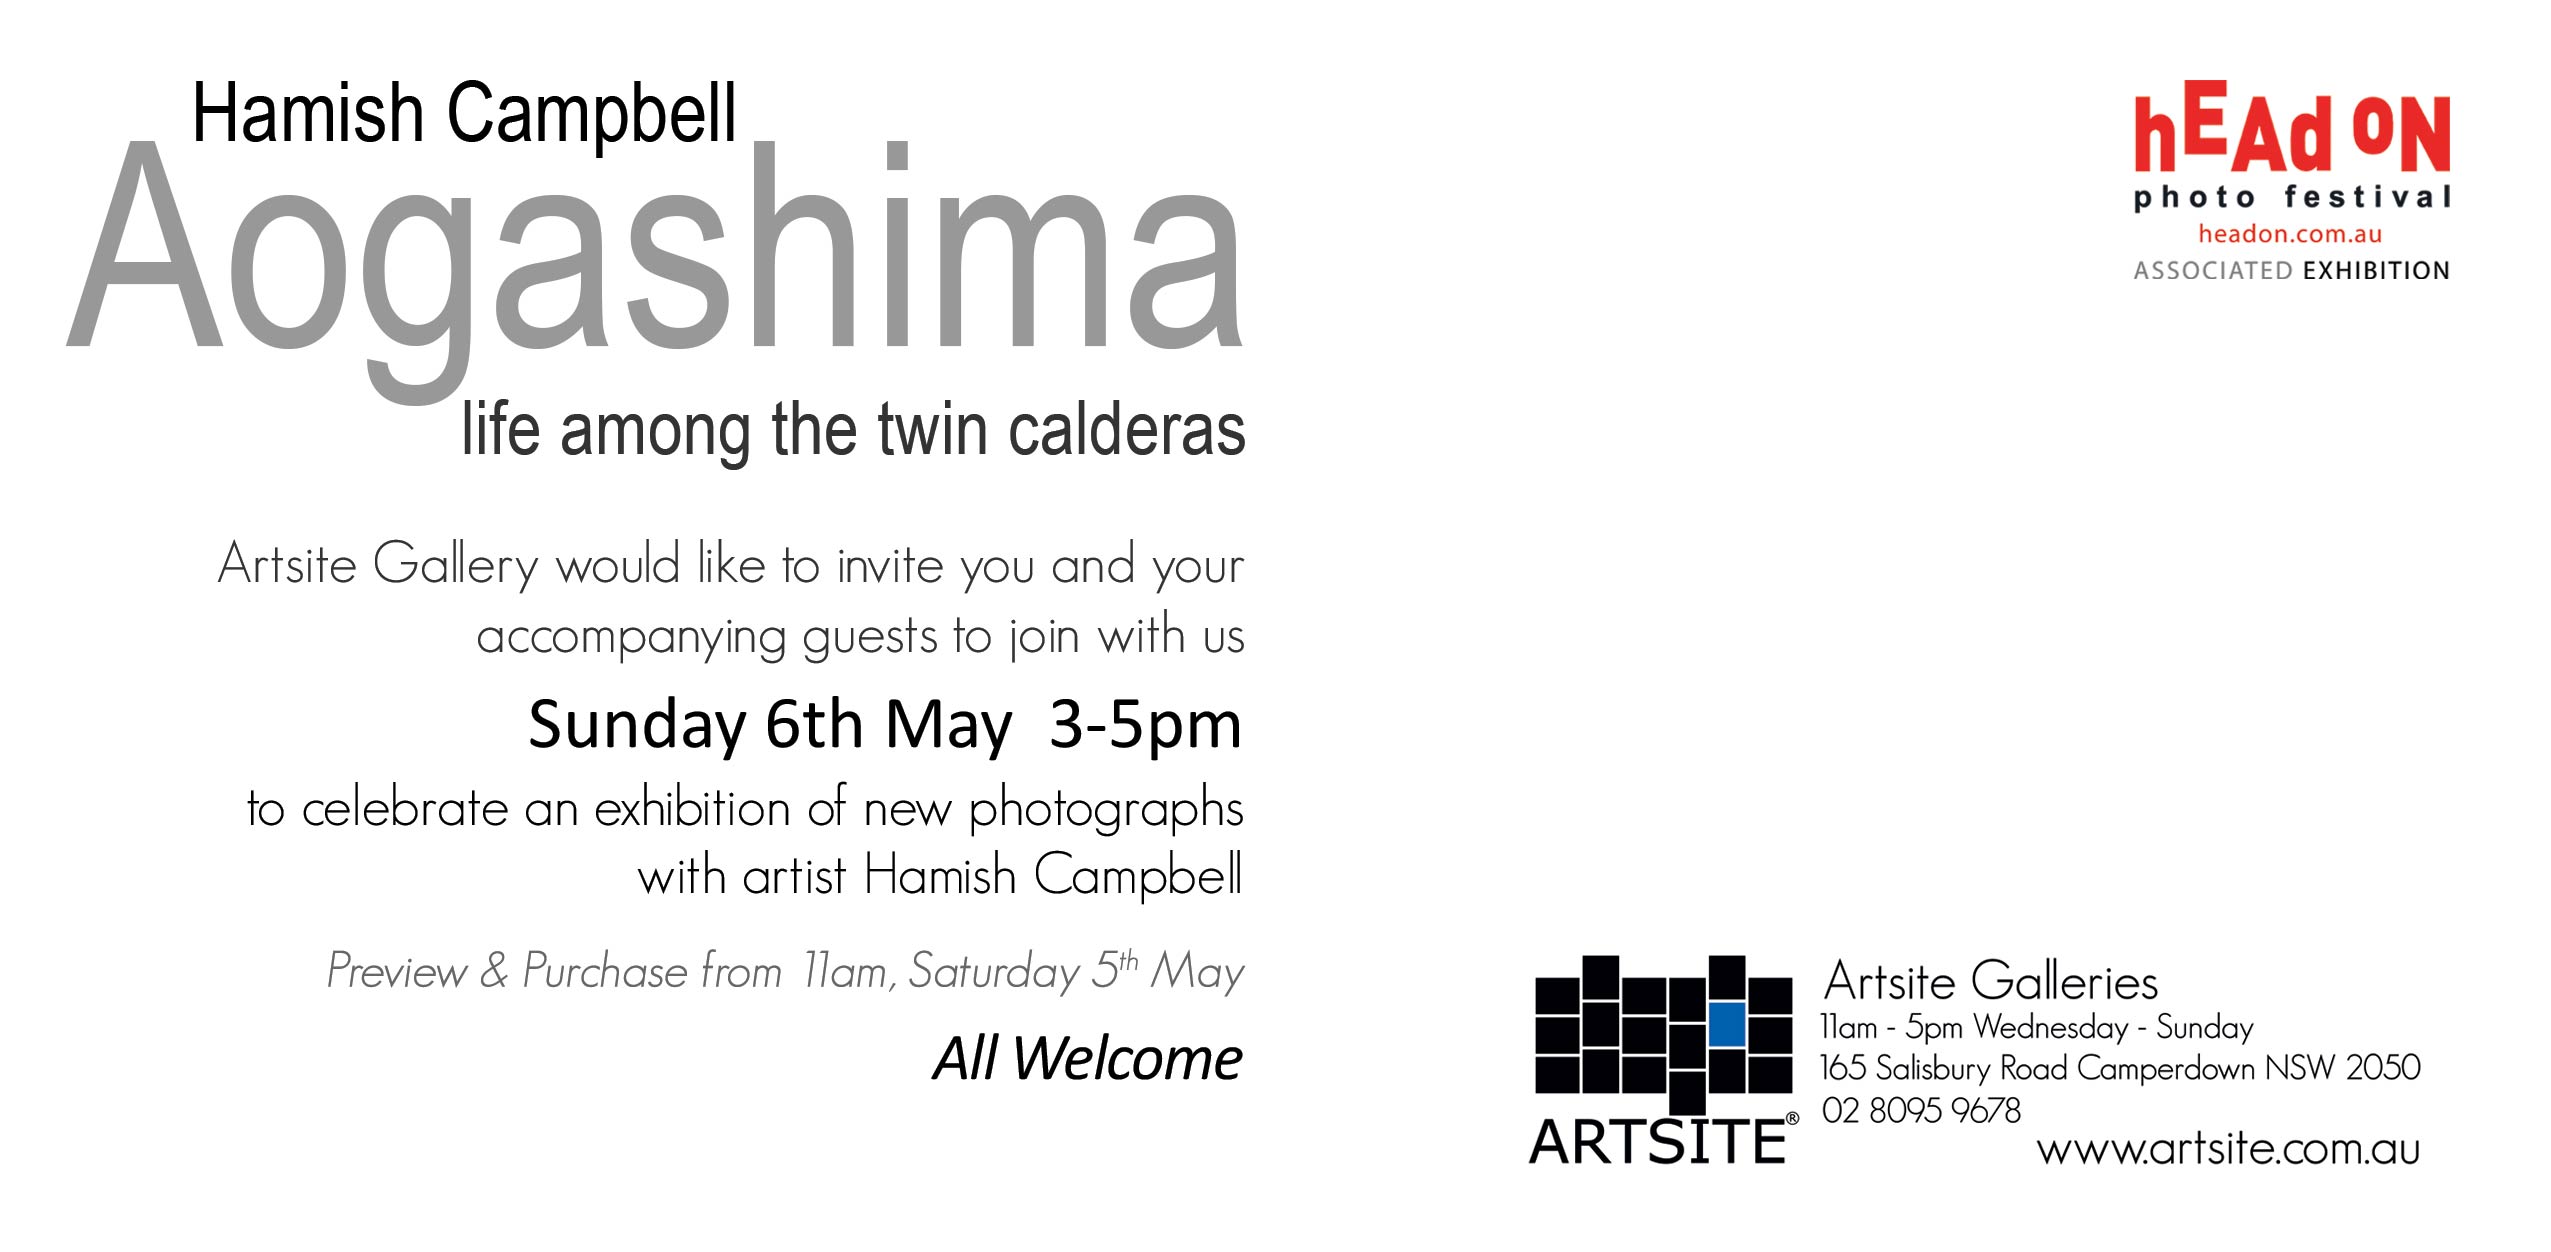 Artsite Contemporary Galleries Exhibition. Hamish Campbell: Aogashima Life between the twin Calderas. Head On Photo Festival 2018, 05-27 May 2018